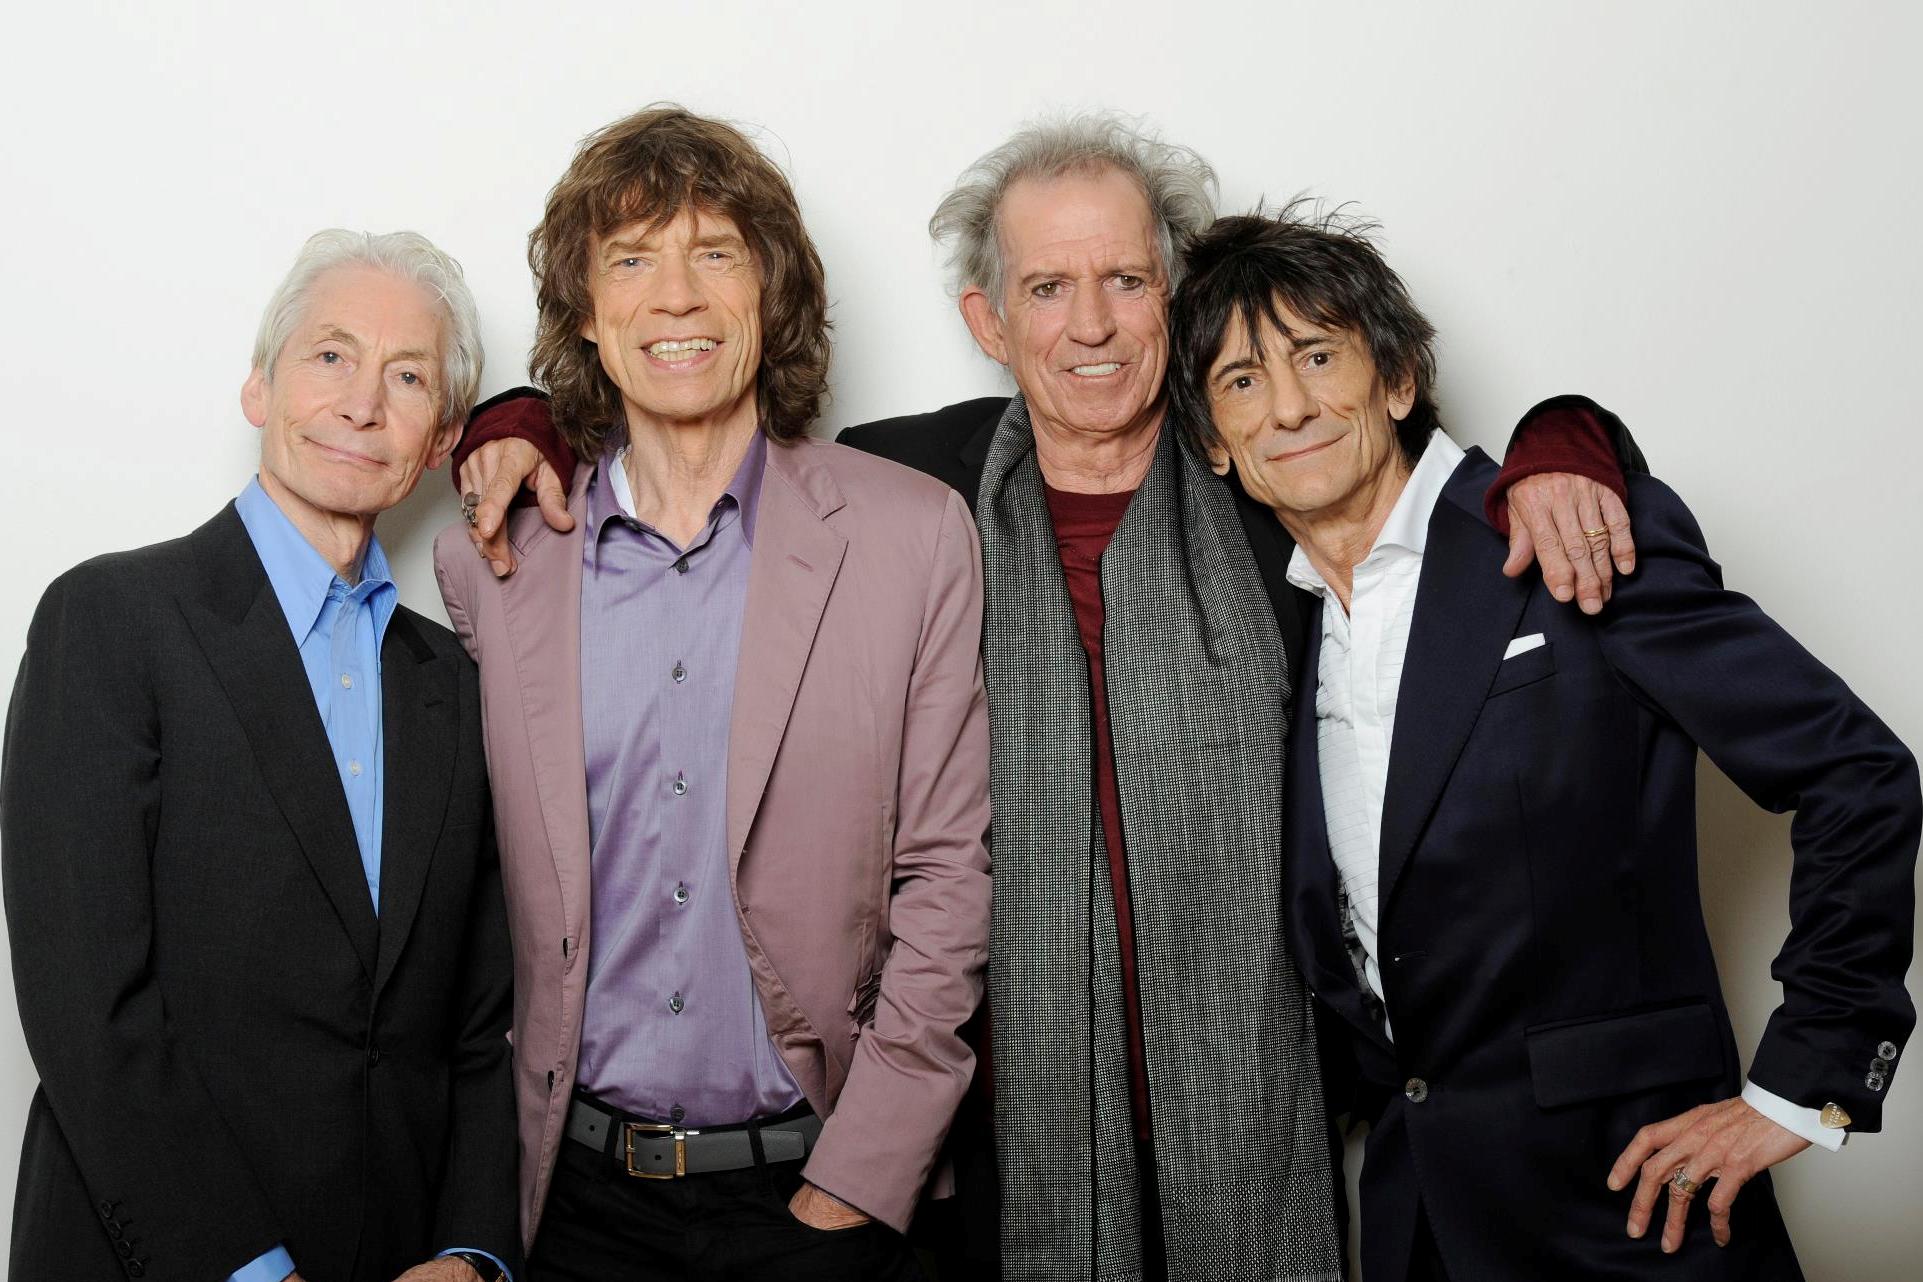 Meet the Legendary Band Members of The Rolling Stones